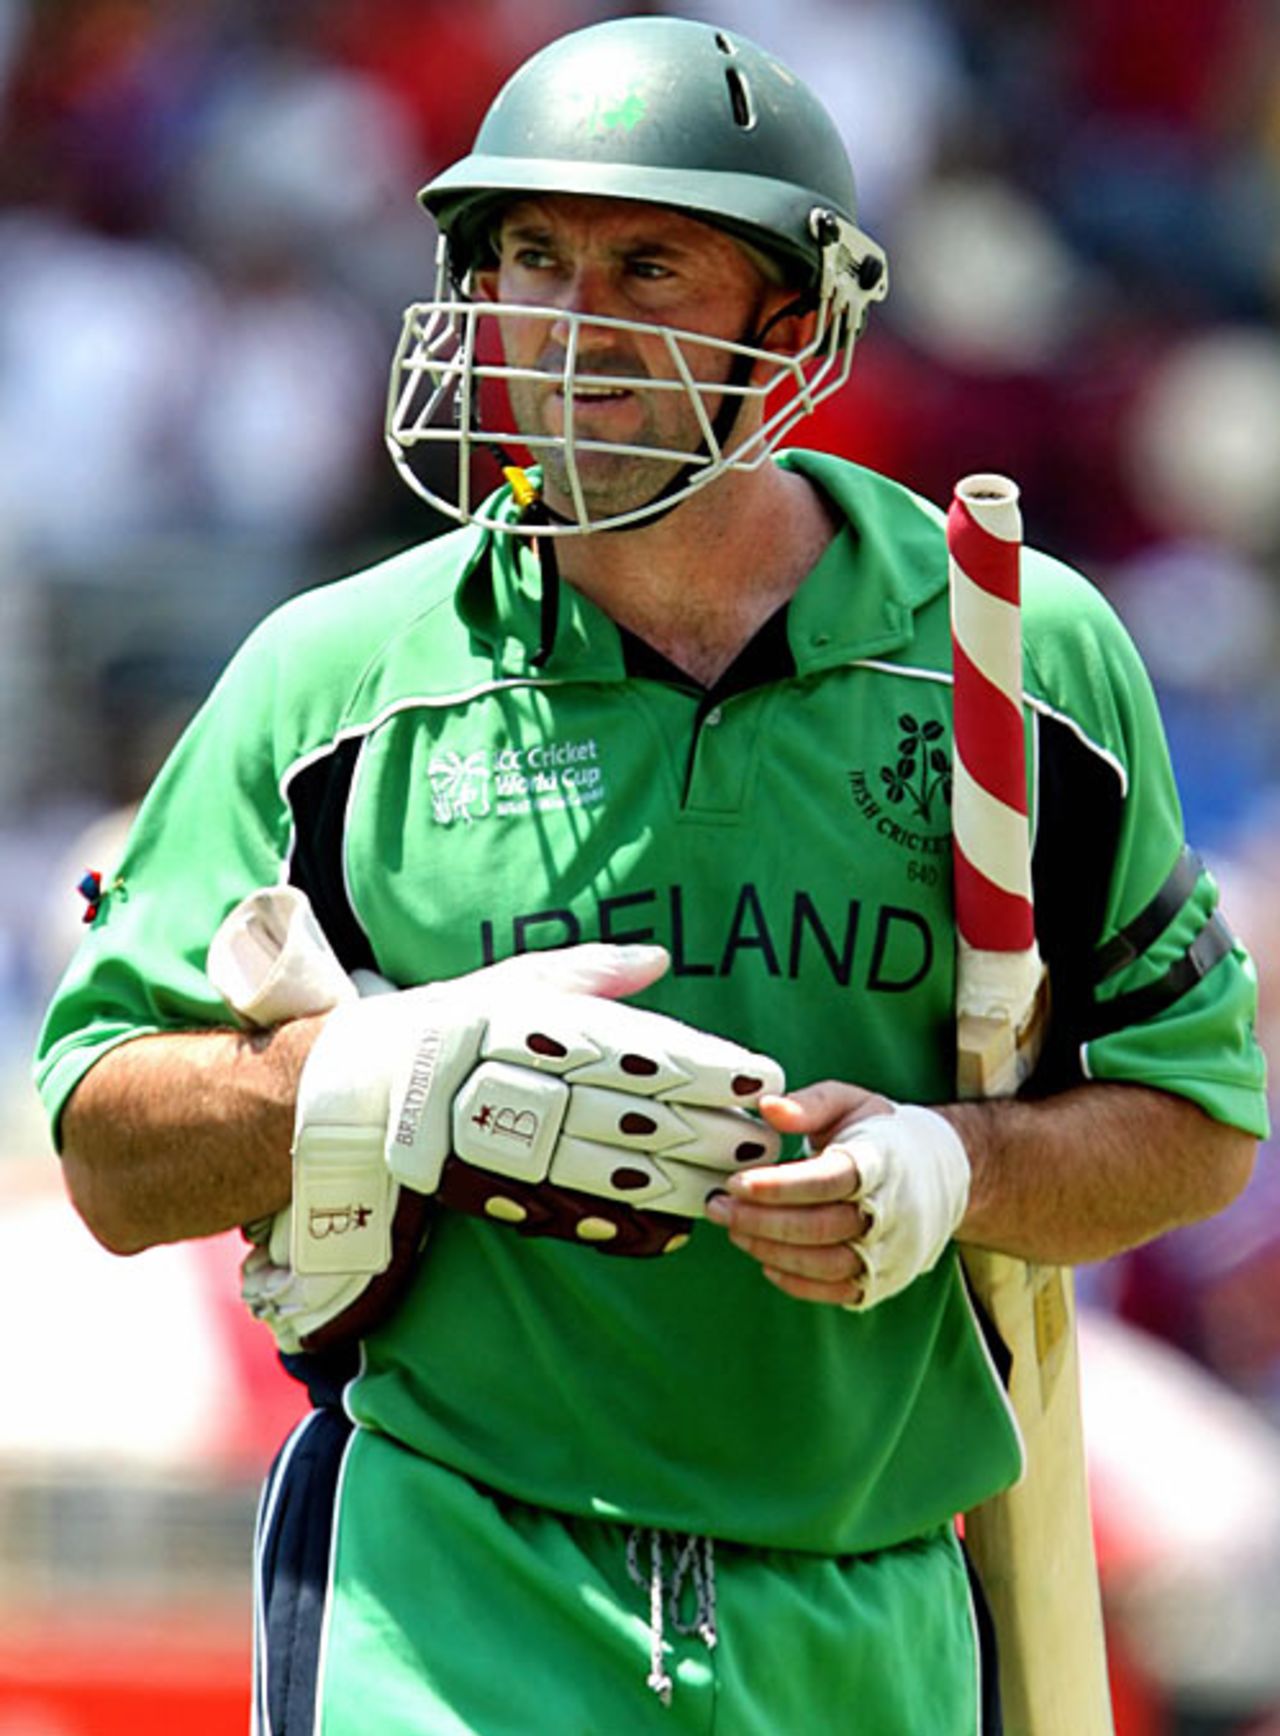 Jeremy Bray departs for 41, West Indies v Ireland, Group D, Kingston, March 23, 2007